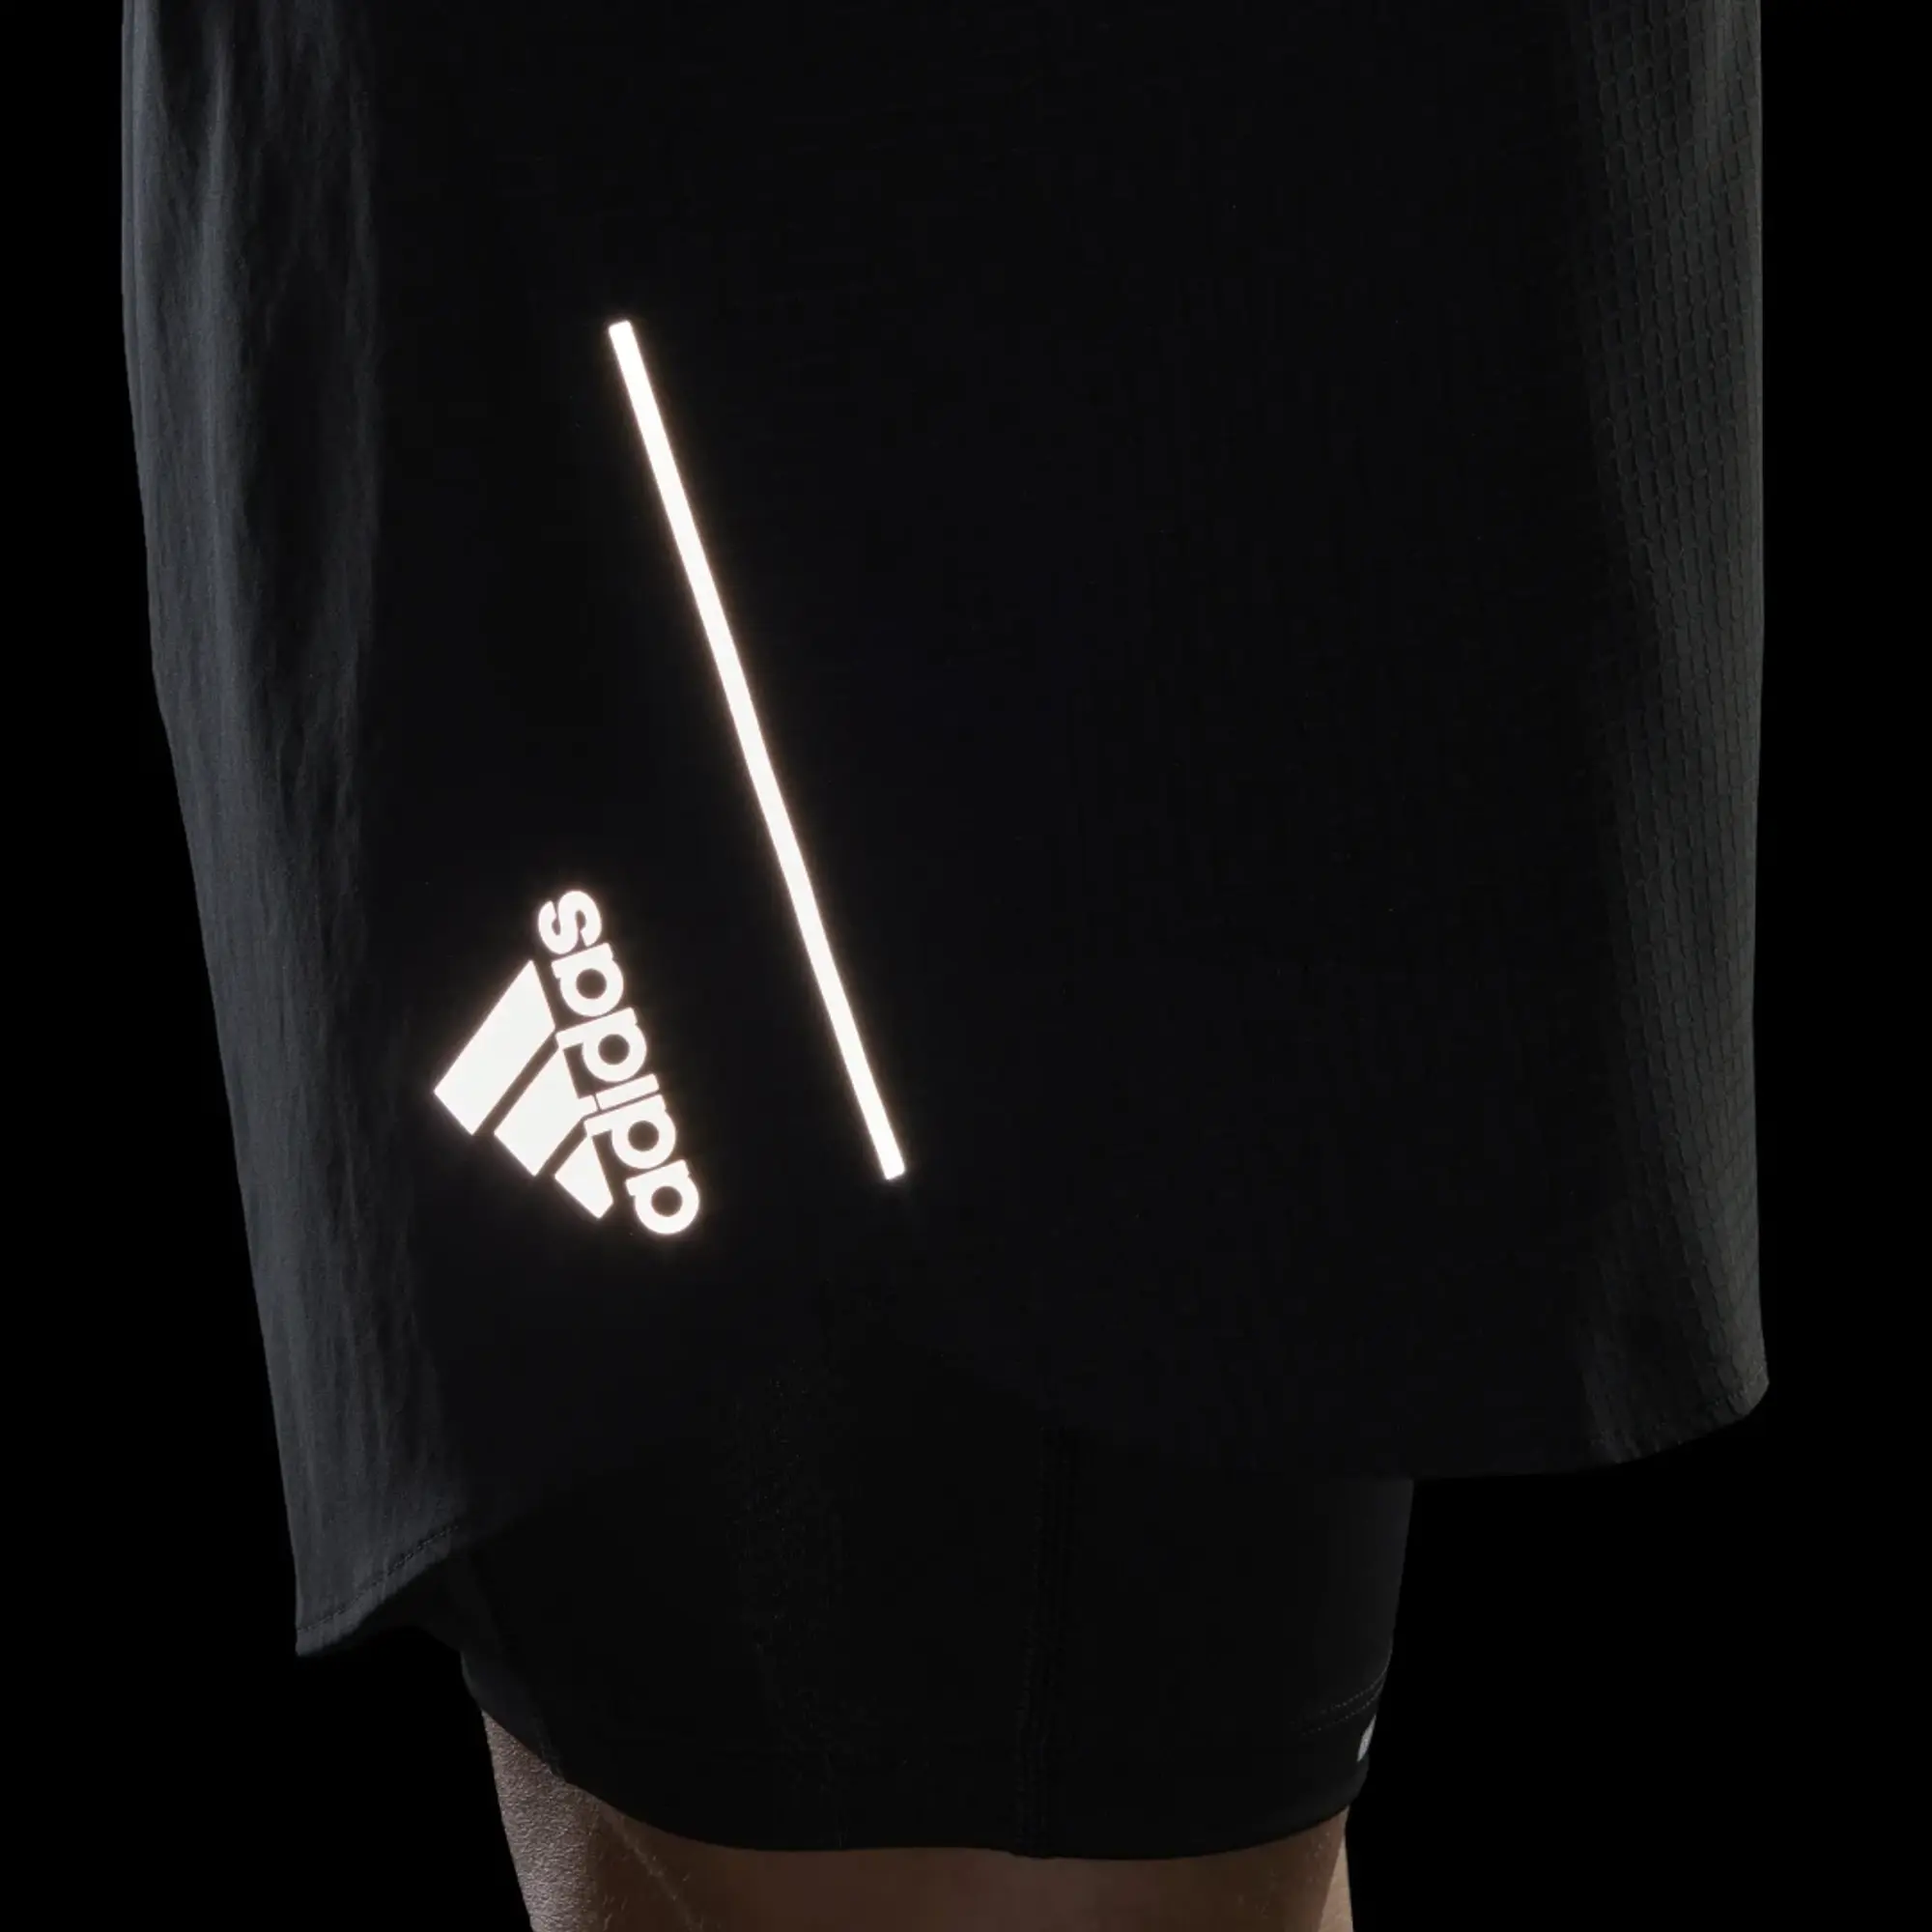 adidas Designed 4 Running Two-in-One Shorts - Black